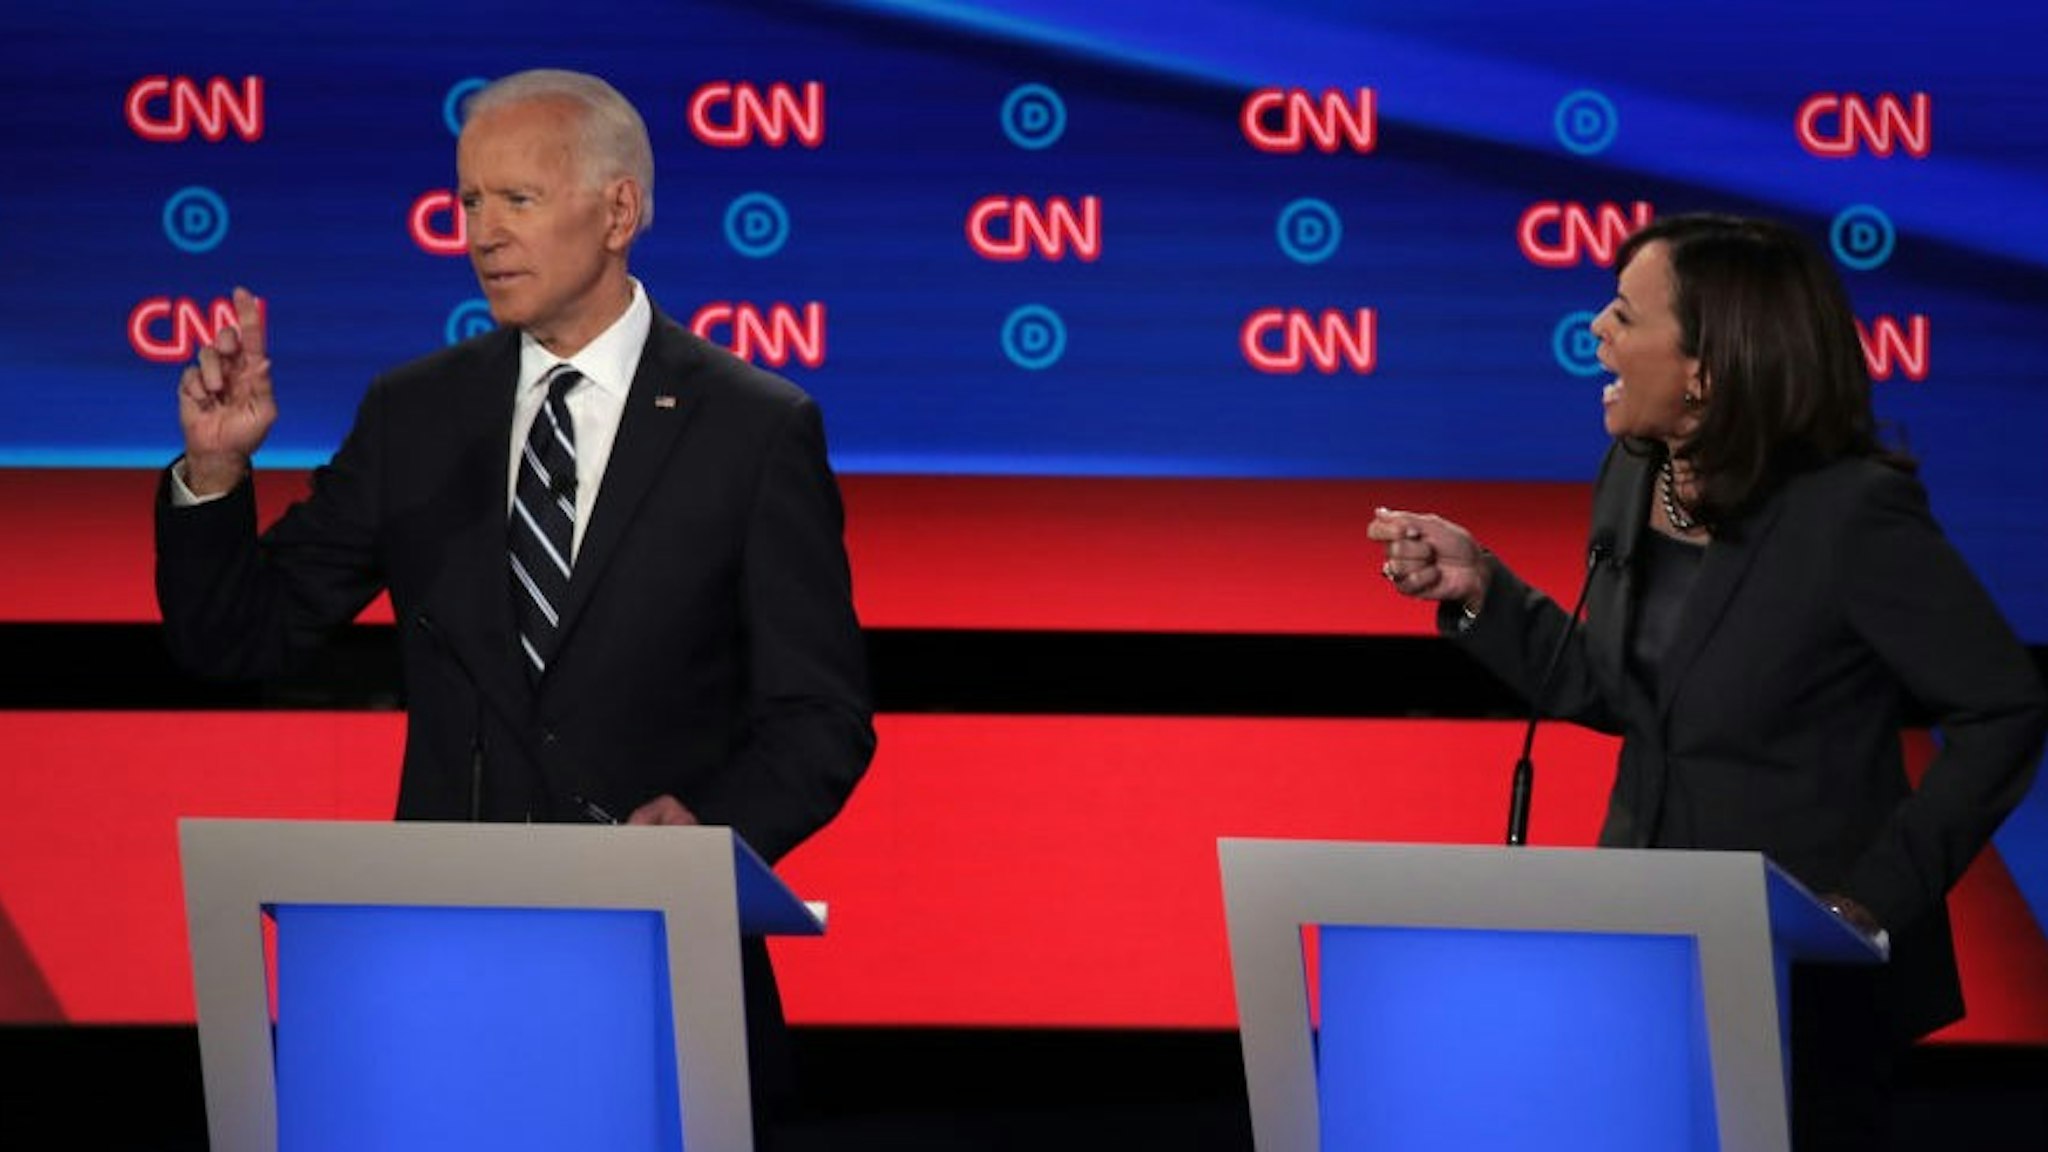 DETROIT, MICHIGAN - JULY 31: Democratic presidential candidate Sen. Kamala Harris (D-CA) (R) speaks while former Vice President Joe Biden listens during the Democratic Presidential Debate at the Fox Theatre July 31, 2019 in Detroit, Michigan. 20 Democratic presidential candidates were split into two groups of 10 to take part in the debate sponsored by CNN held over two nights at Detroit’s Fox Theatre. (Photo by